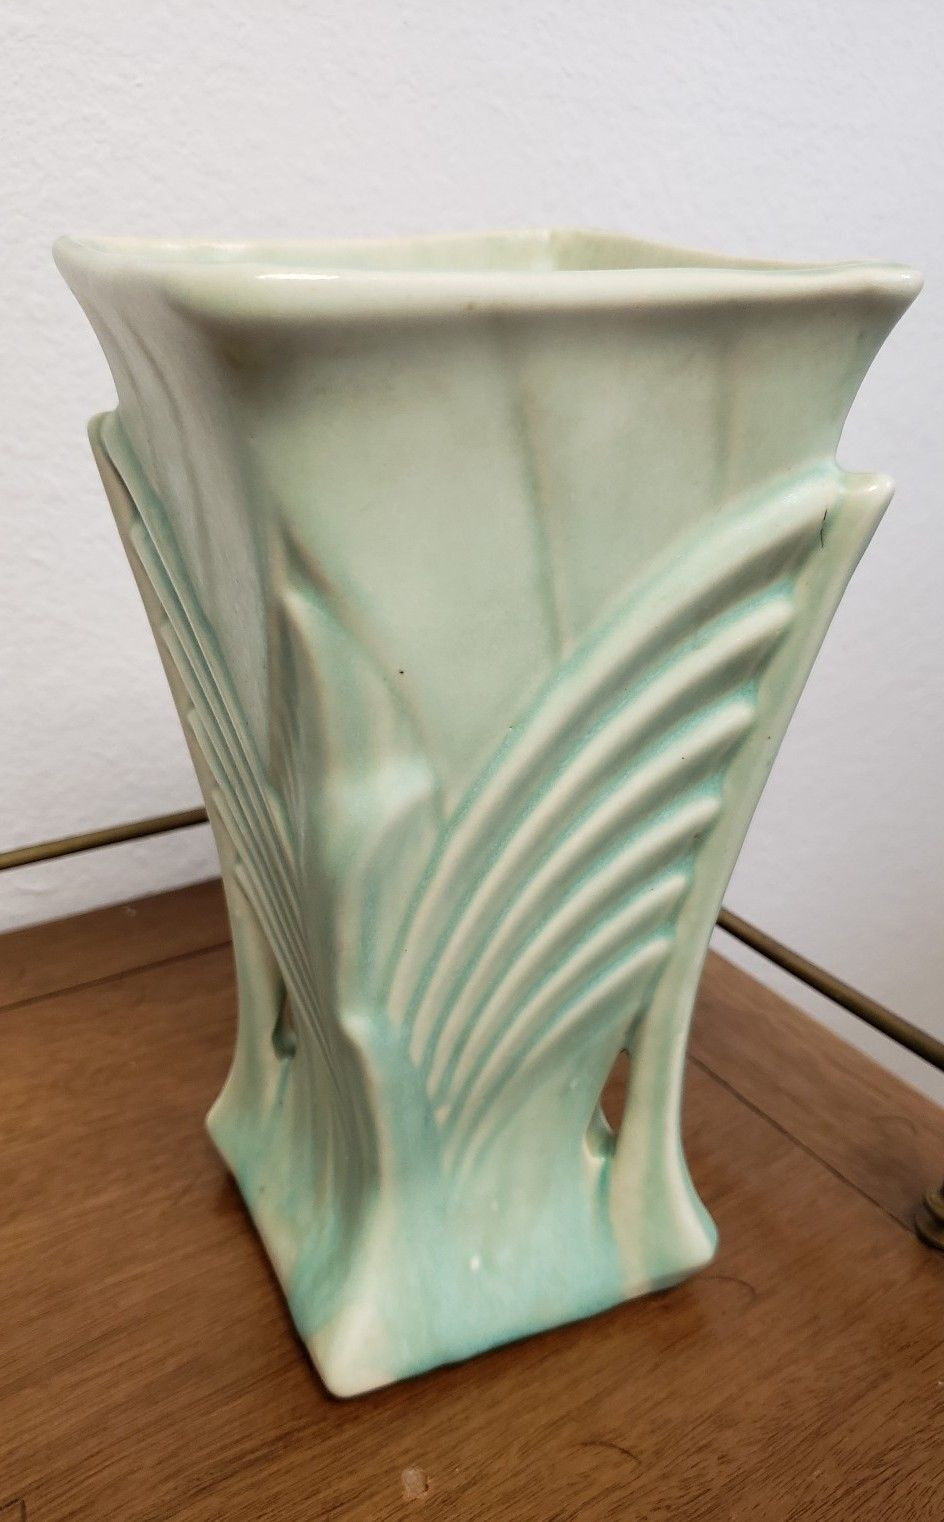 mccoy vases for sale of mccoy pottery square vase vintage art deco with wings 9 turquoise intended for mccoy pottery square vase vintage art deco with wings 9 turquoise blue green 1 of 4 mccoy pottery